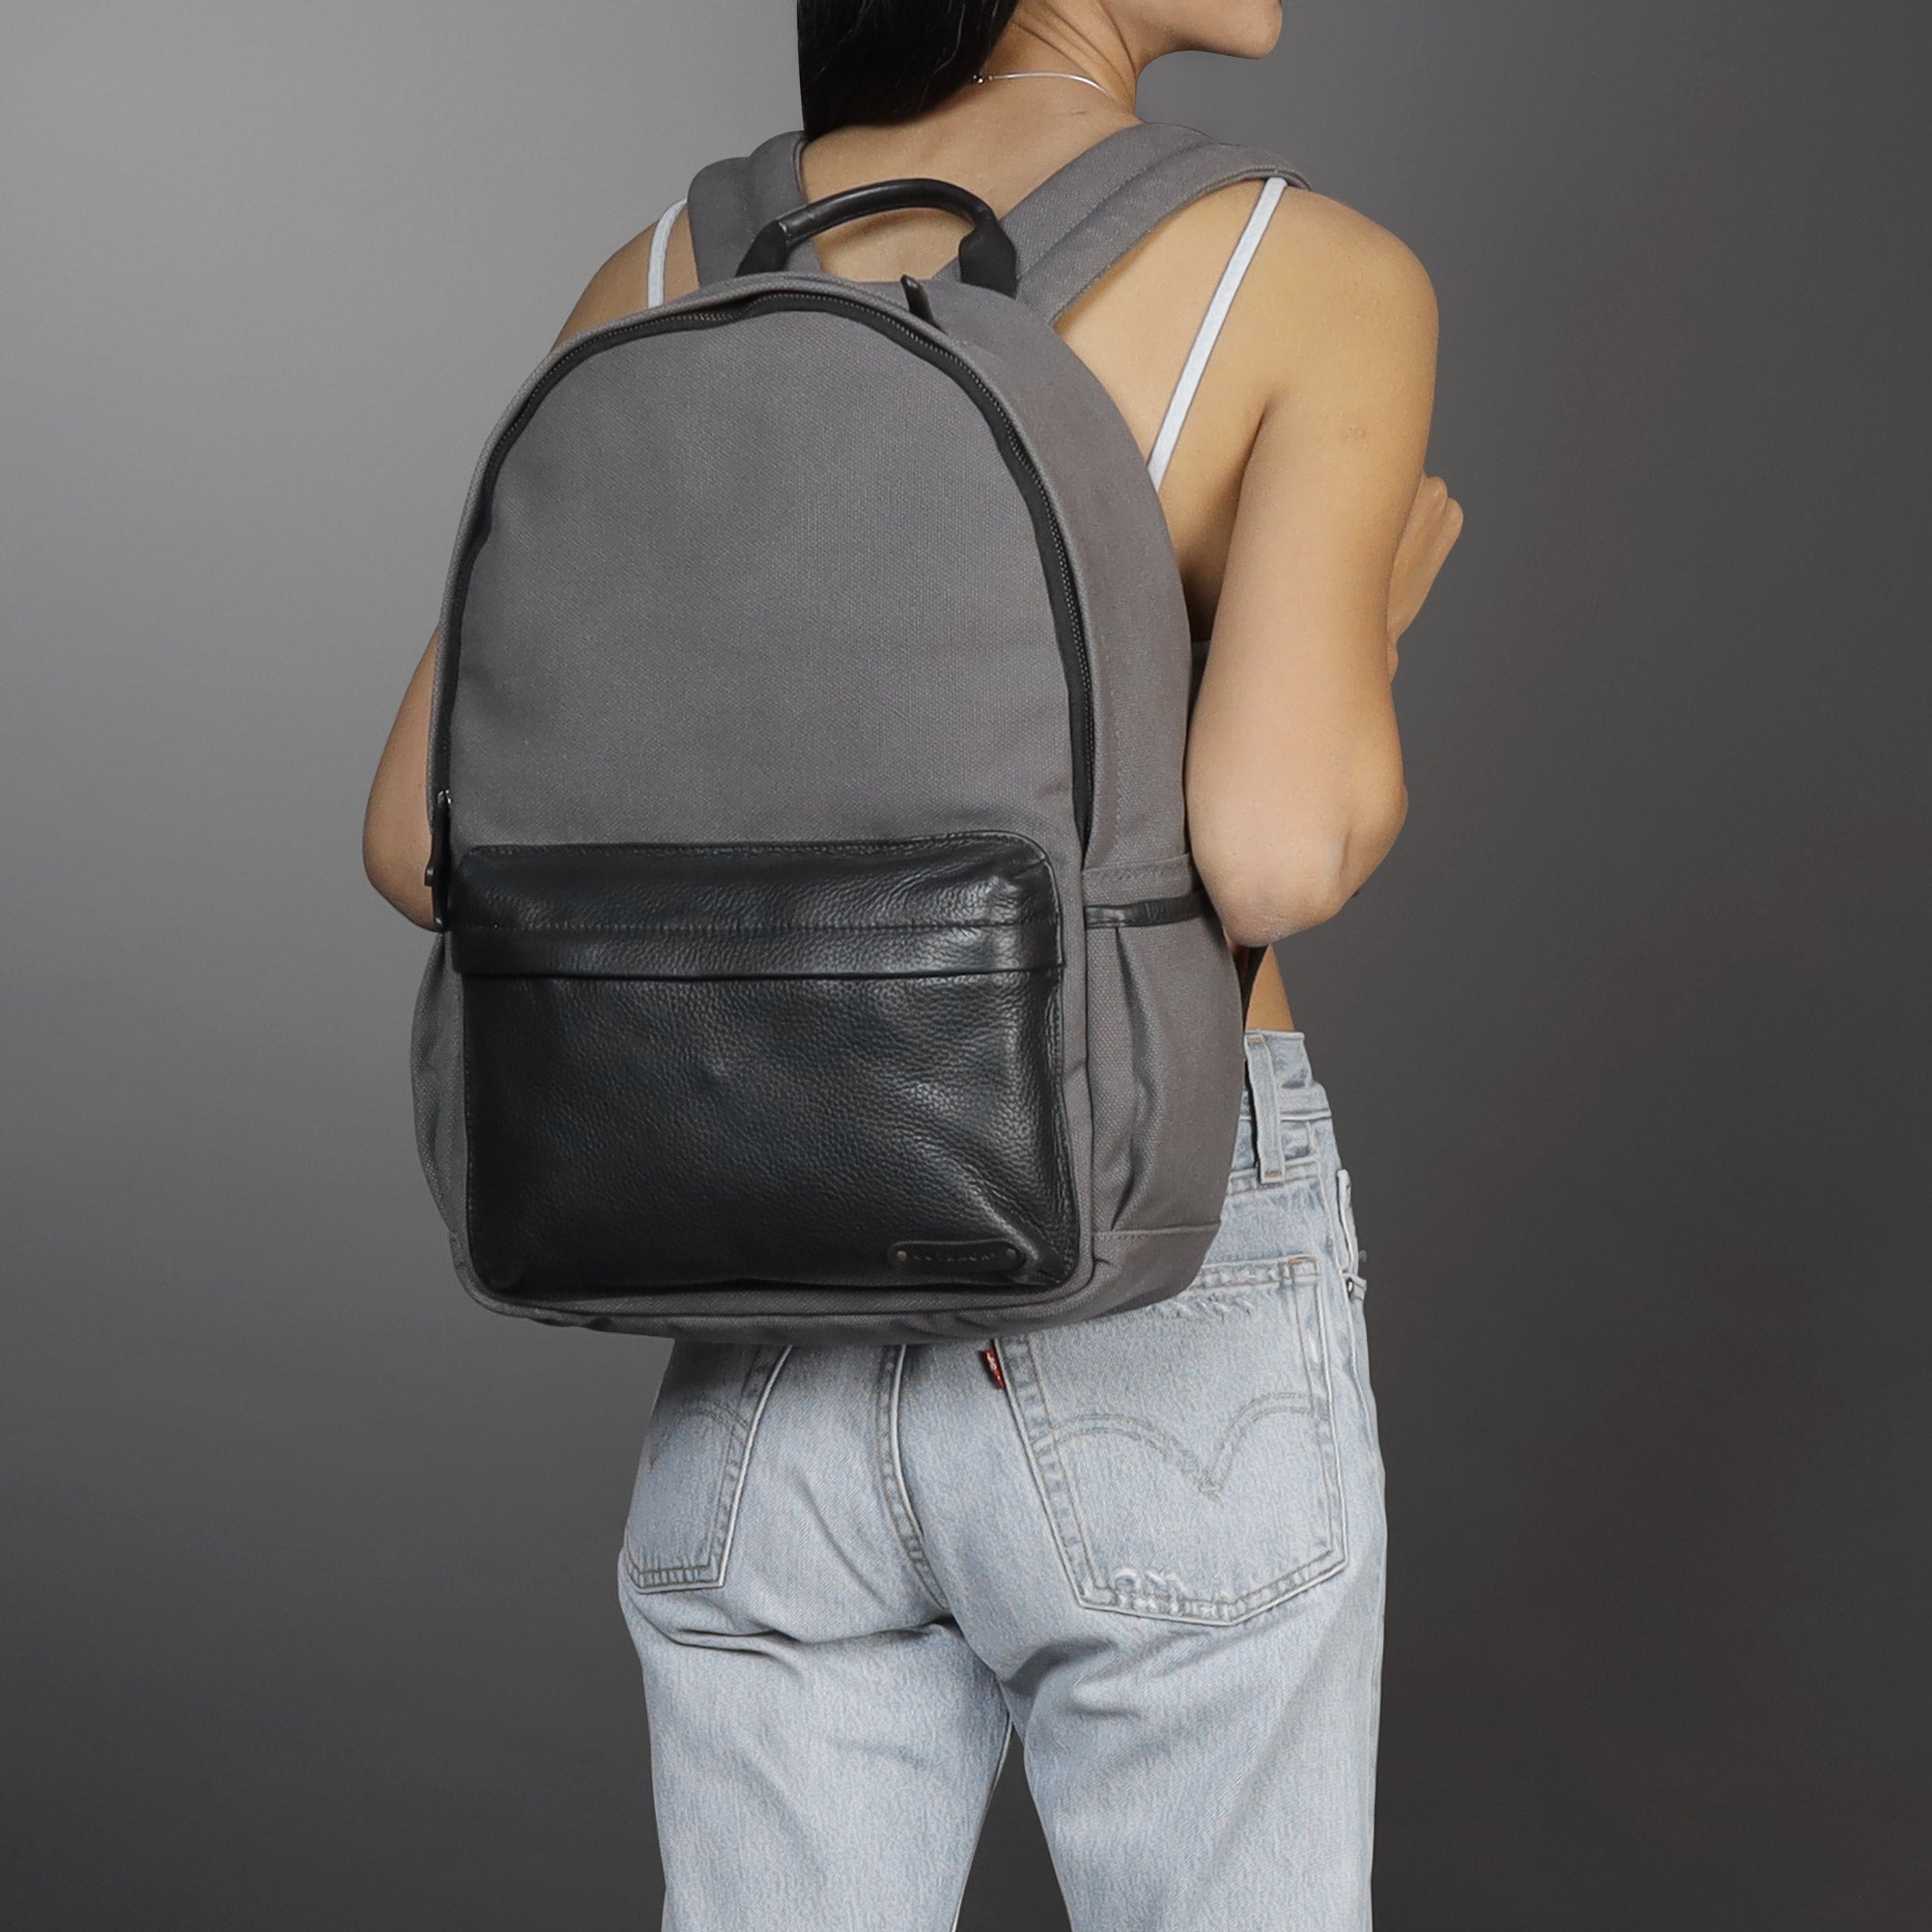 grey canvas laptop backpack for girls